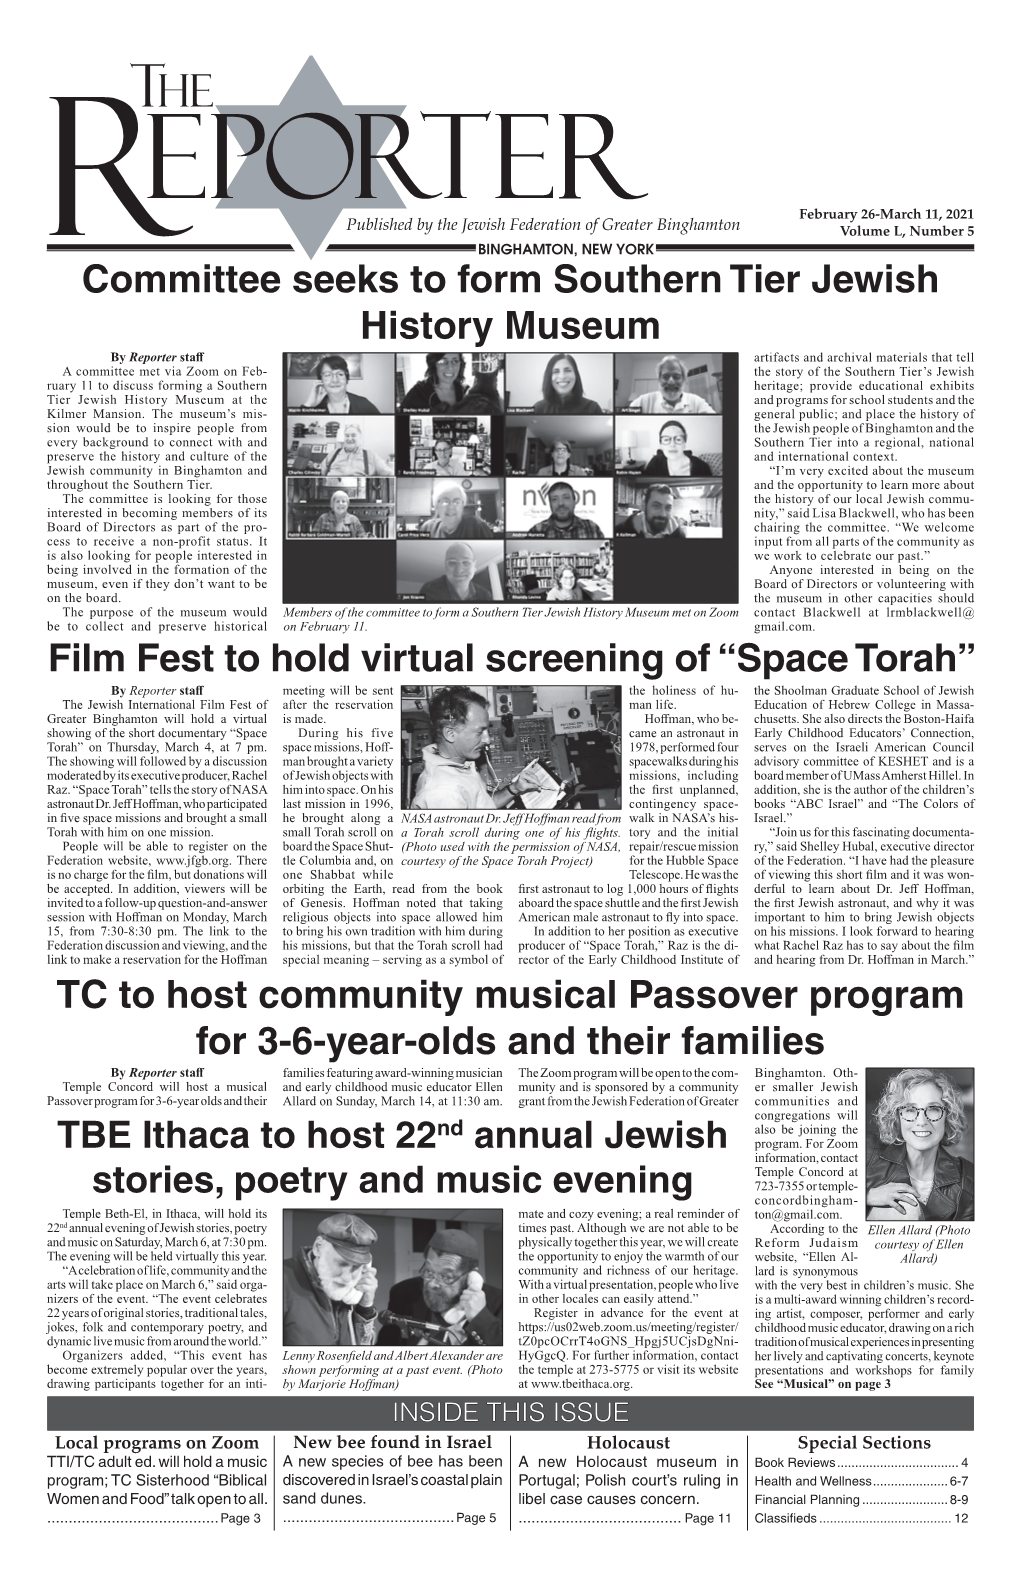 Film Fest to Hold Virtual Screening of “Space Torah” Committee Seeks to Form Southern Tier Jewish History Museum TC to Host